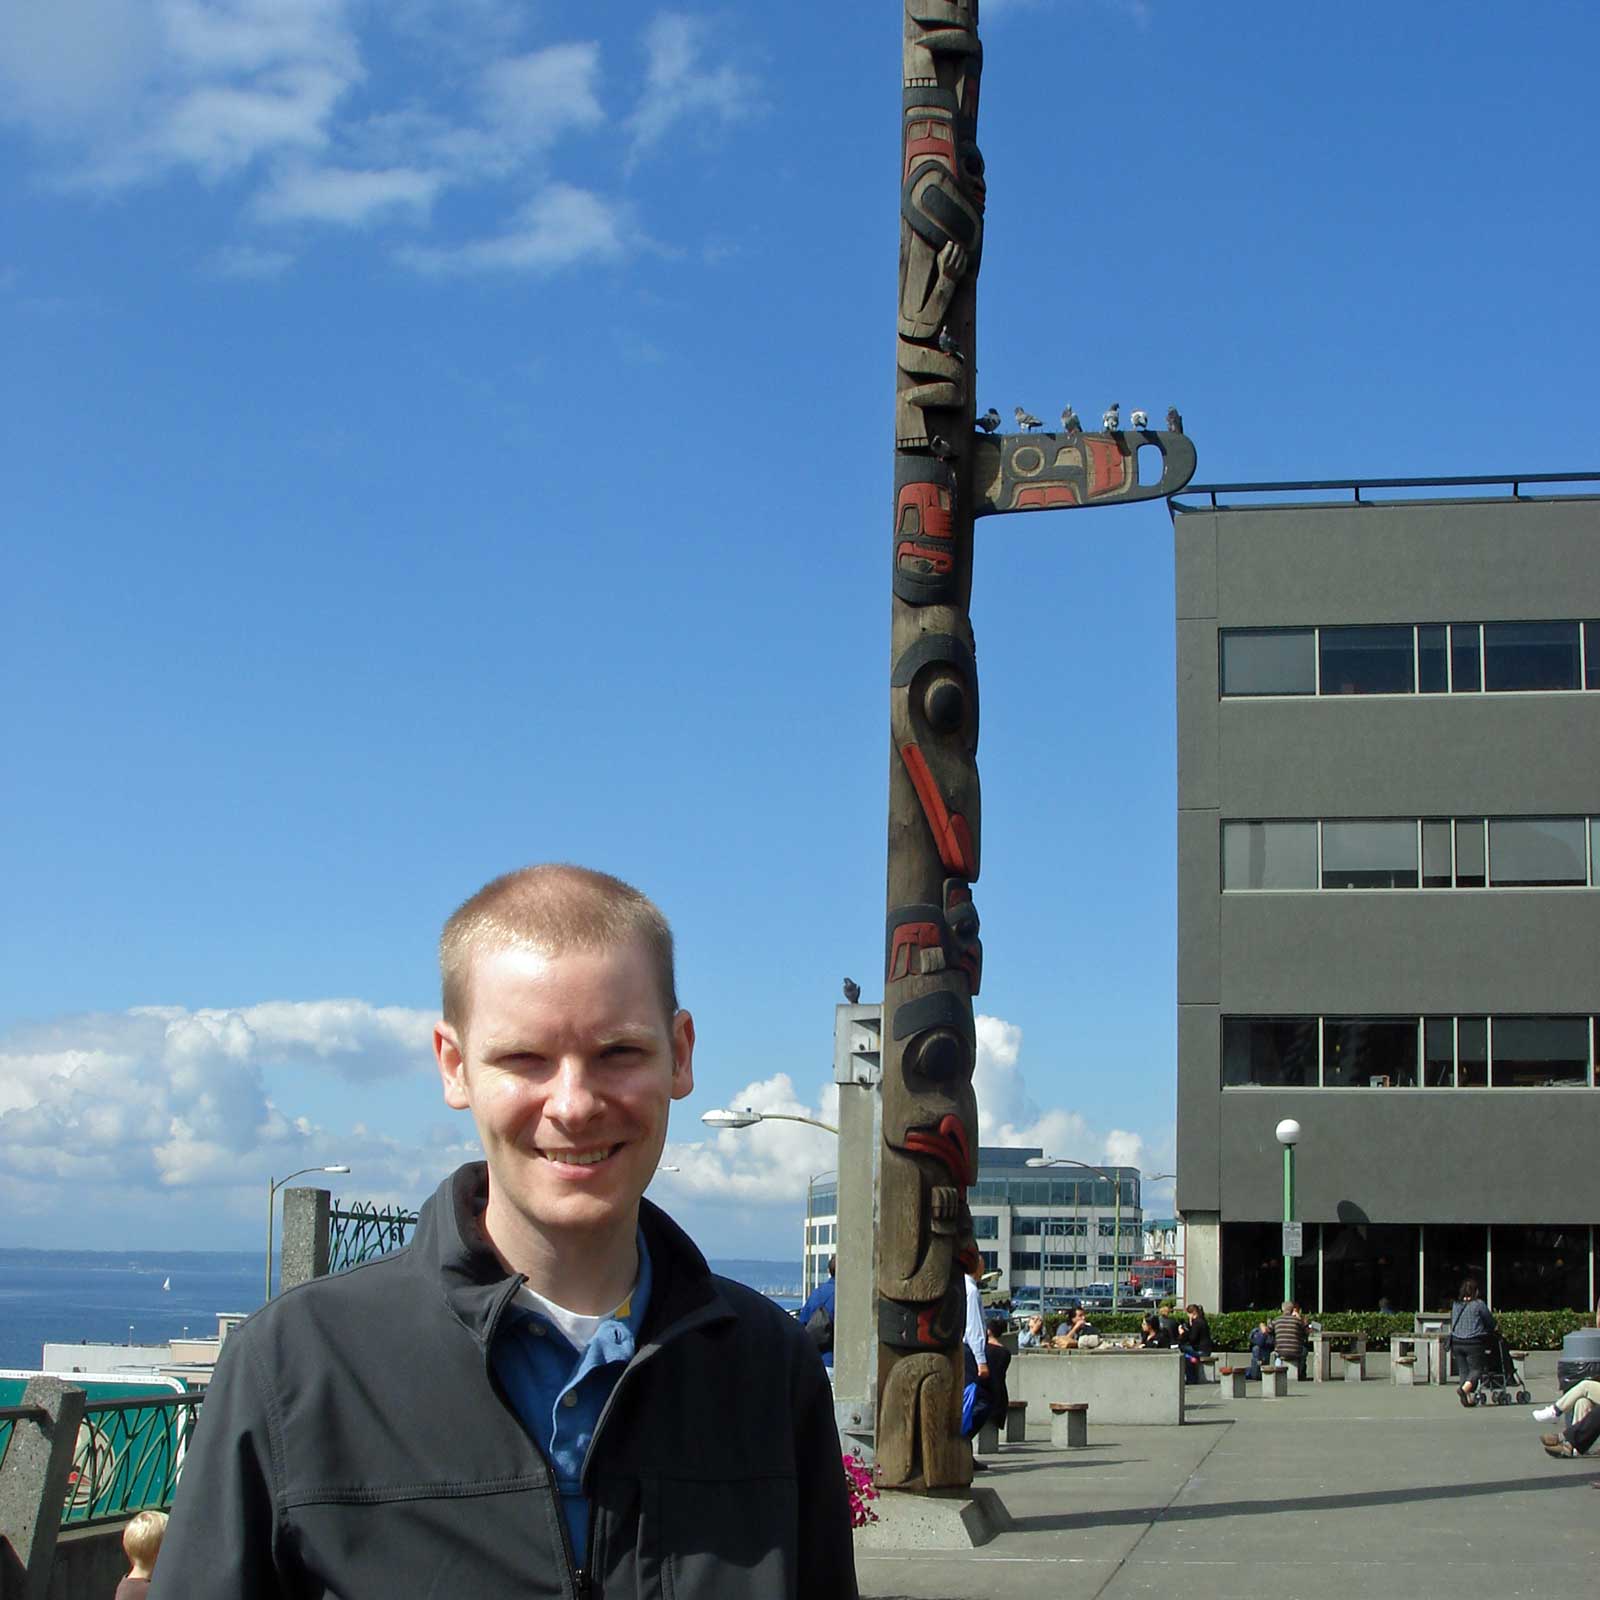 William standing in front of a tall totem pole